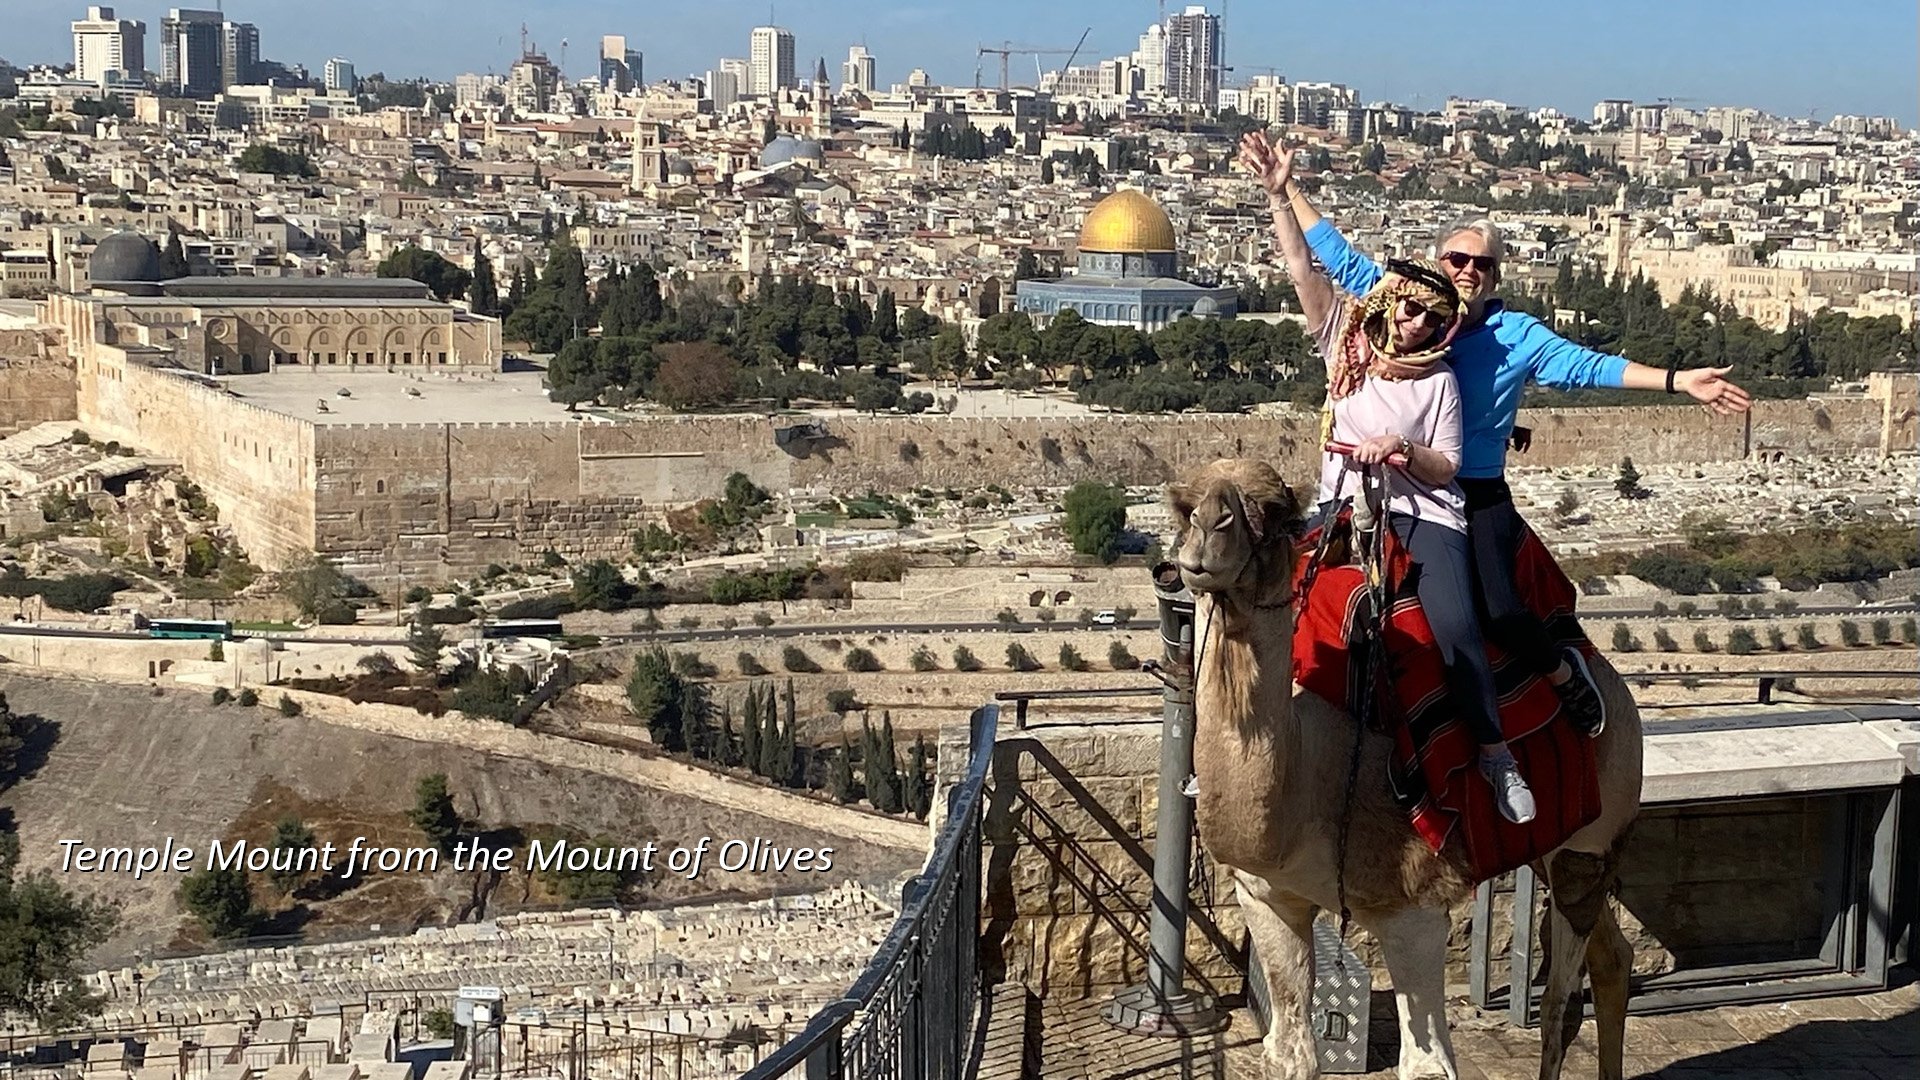 Temple Mount from Mount of Olives with camel - captioned.jpg